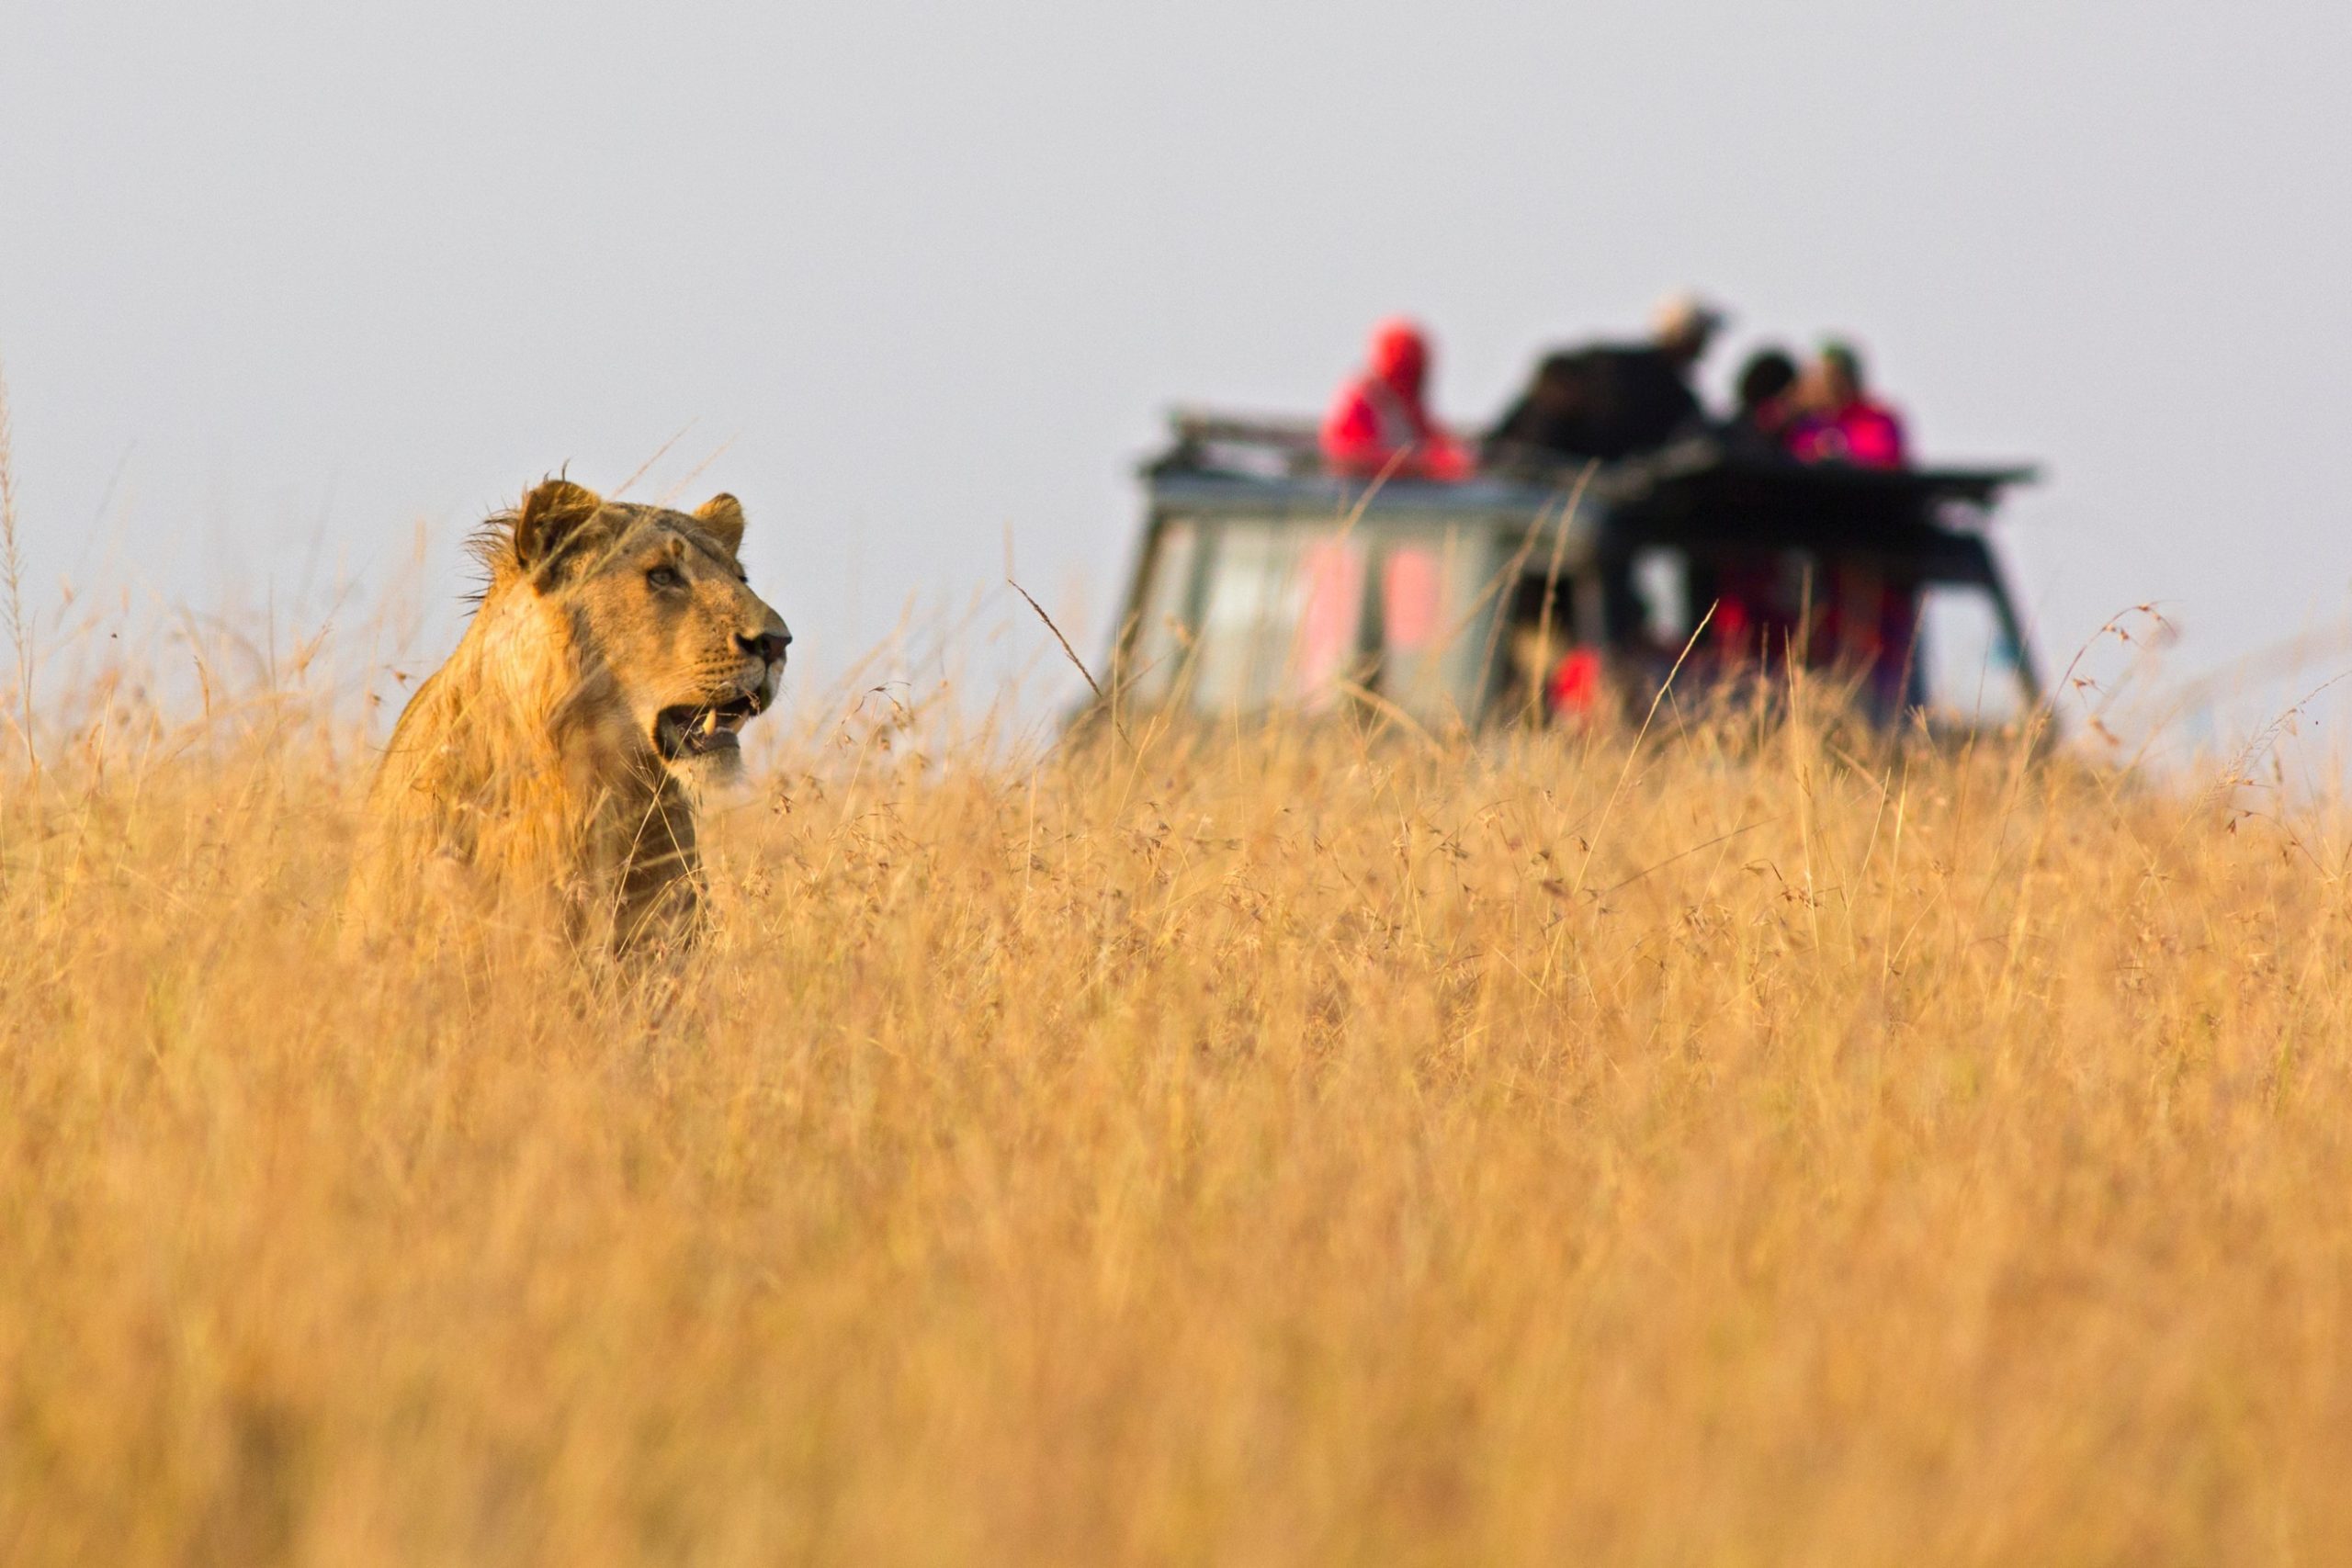 Lion in the Savanna with a Tour Vehicle with tourists in the Background